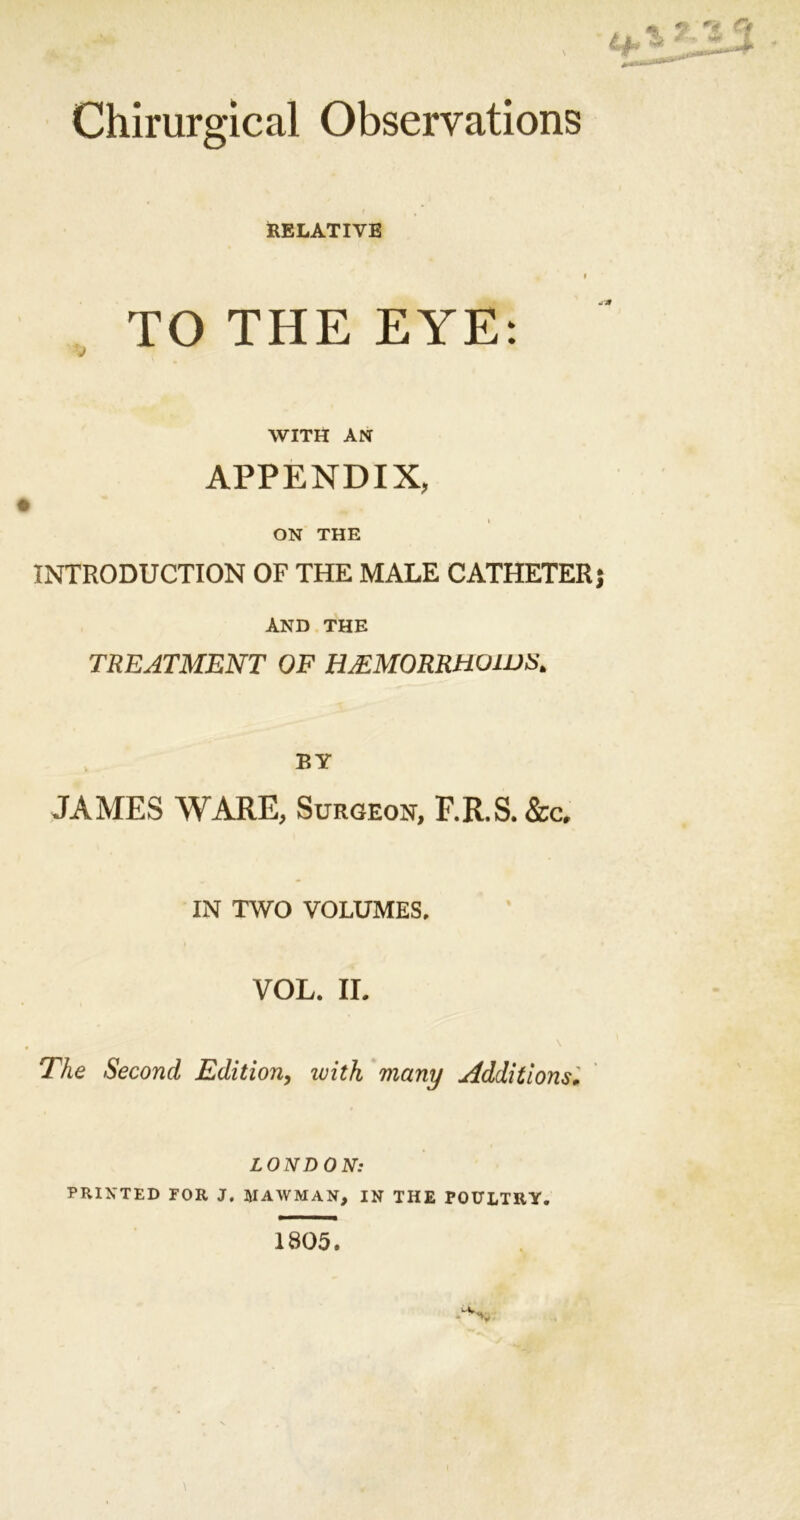 Chirurgical Observations * RELATIVE l TO THE EYE: WITH AN APPENDIX, ON THE INTRODUCTION OF THE MALE CATHETER AND THE TREATMENT OF HJ£MORRH01US> BY JAMES WARE, Surgeon, F.R.S. &c, IN TWO VOLUMES, VOL. II. The Second Edition, ivith many Additions• LONDON: PRINTED FOR J. JIAWMAIf, IN THE POULTRY. 1805.